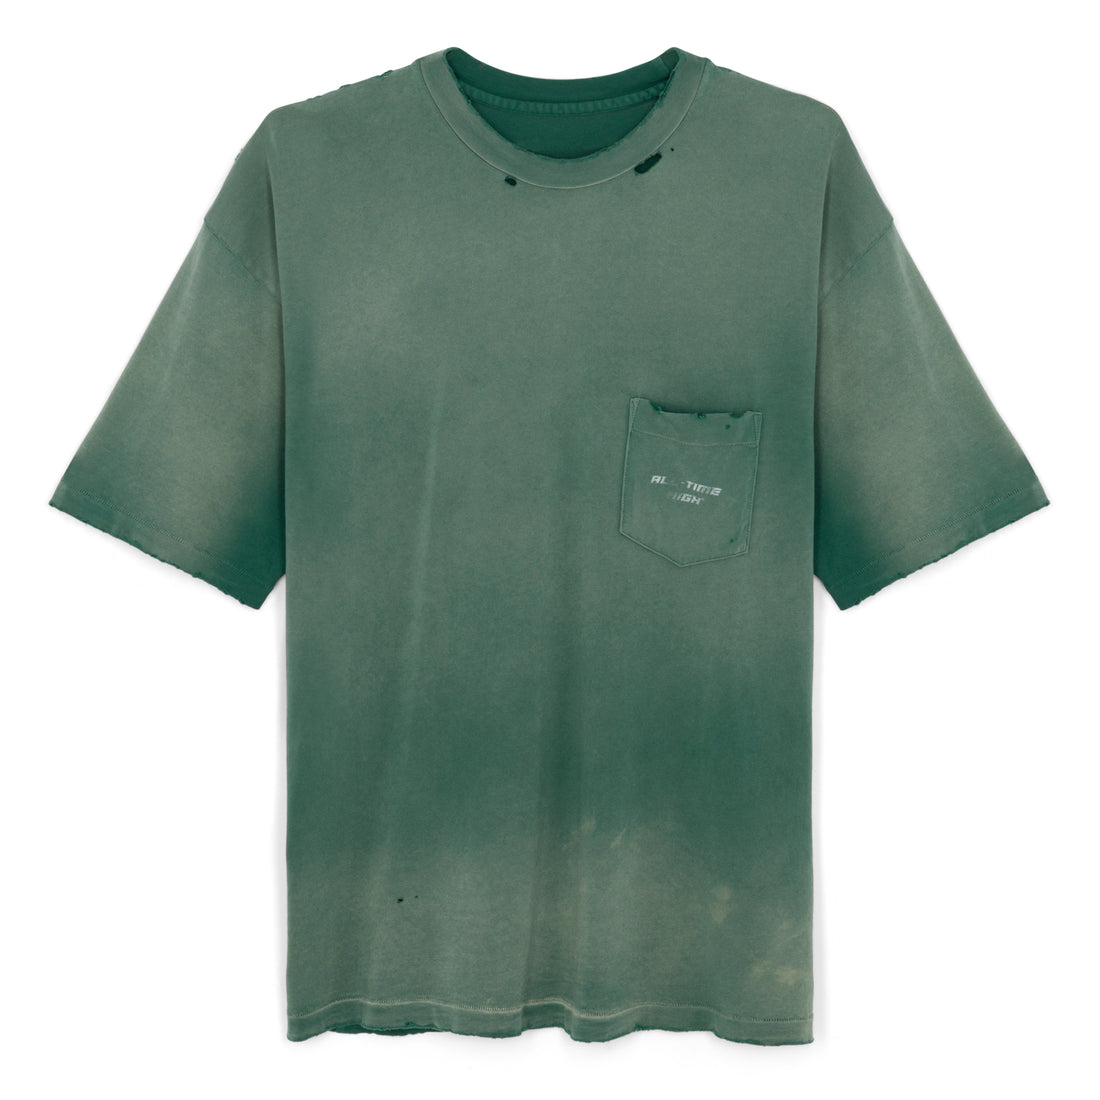  Detail of cotton single stitch pocket tee dyed green then faded and washed for vintage look 